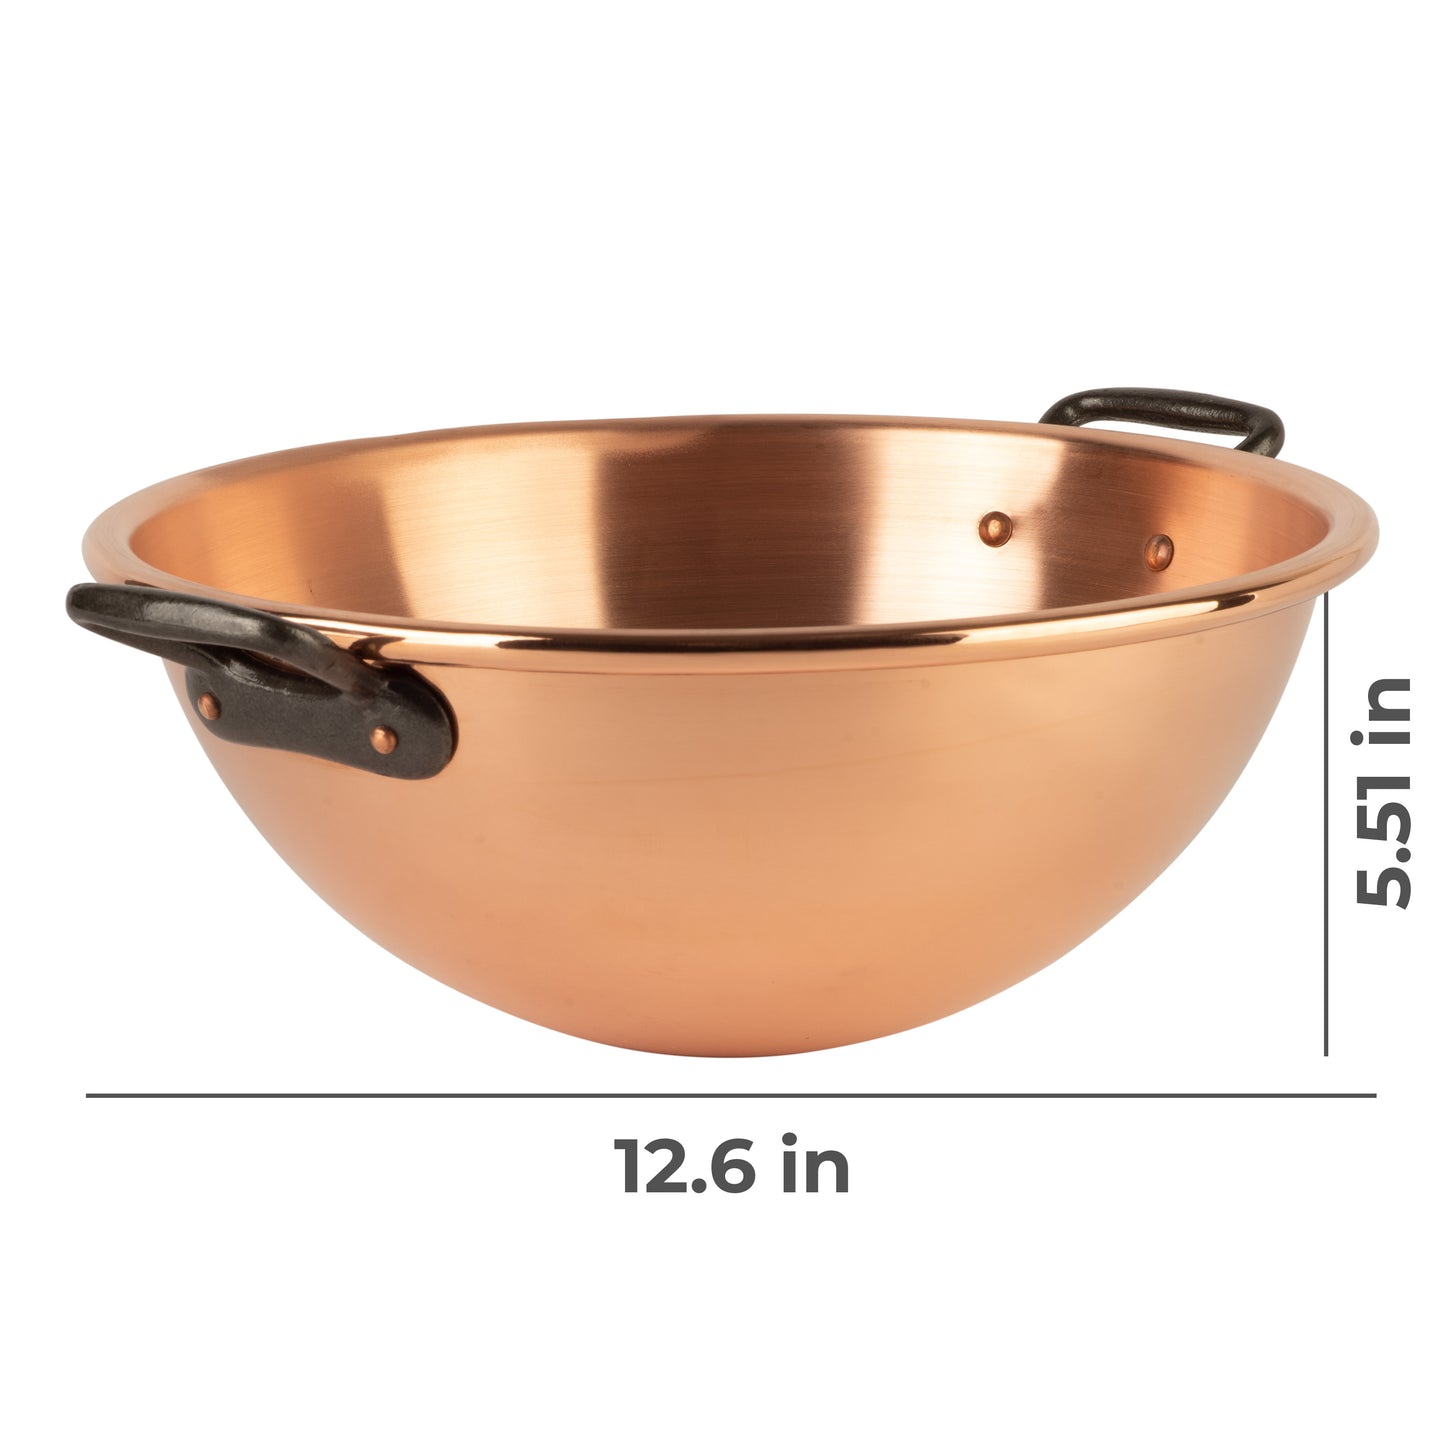 Pure copper whipping bowl, 6.3 qt